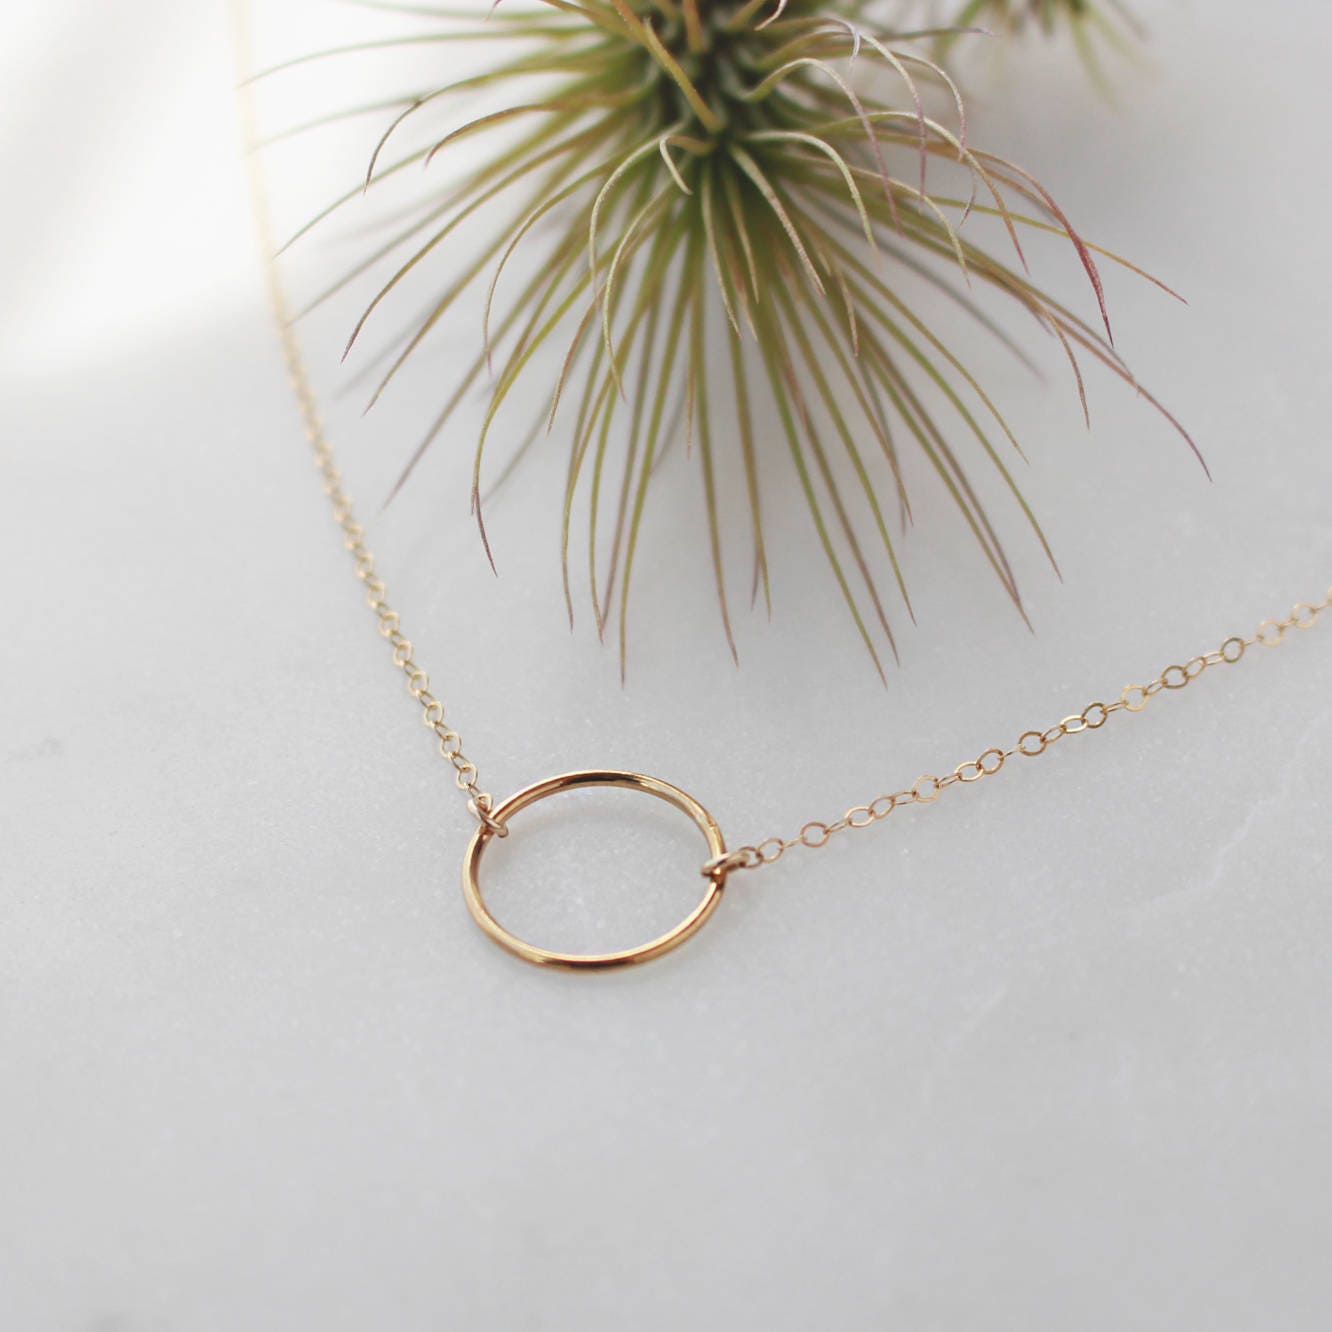 Gold Dainty Circle Link Necklace - 14k Gold Filled, 15mm Circle